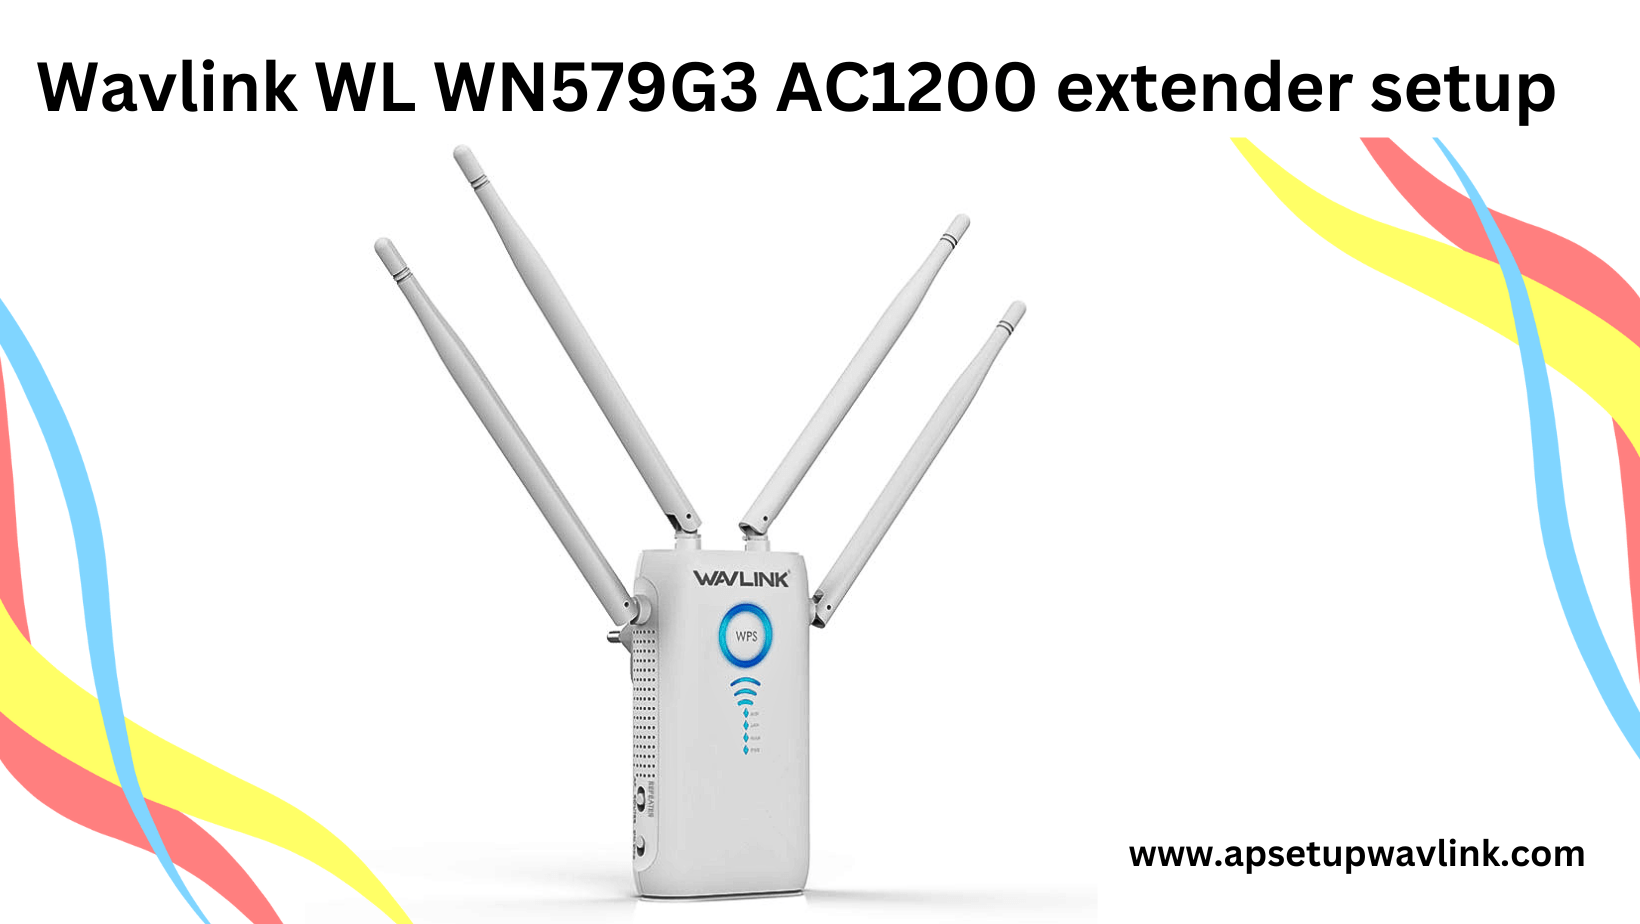 You are currently viewing Wavlink WL WN579G3 AC1200 extender setup